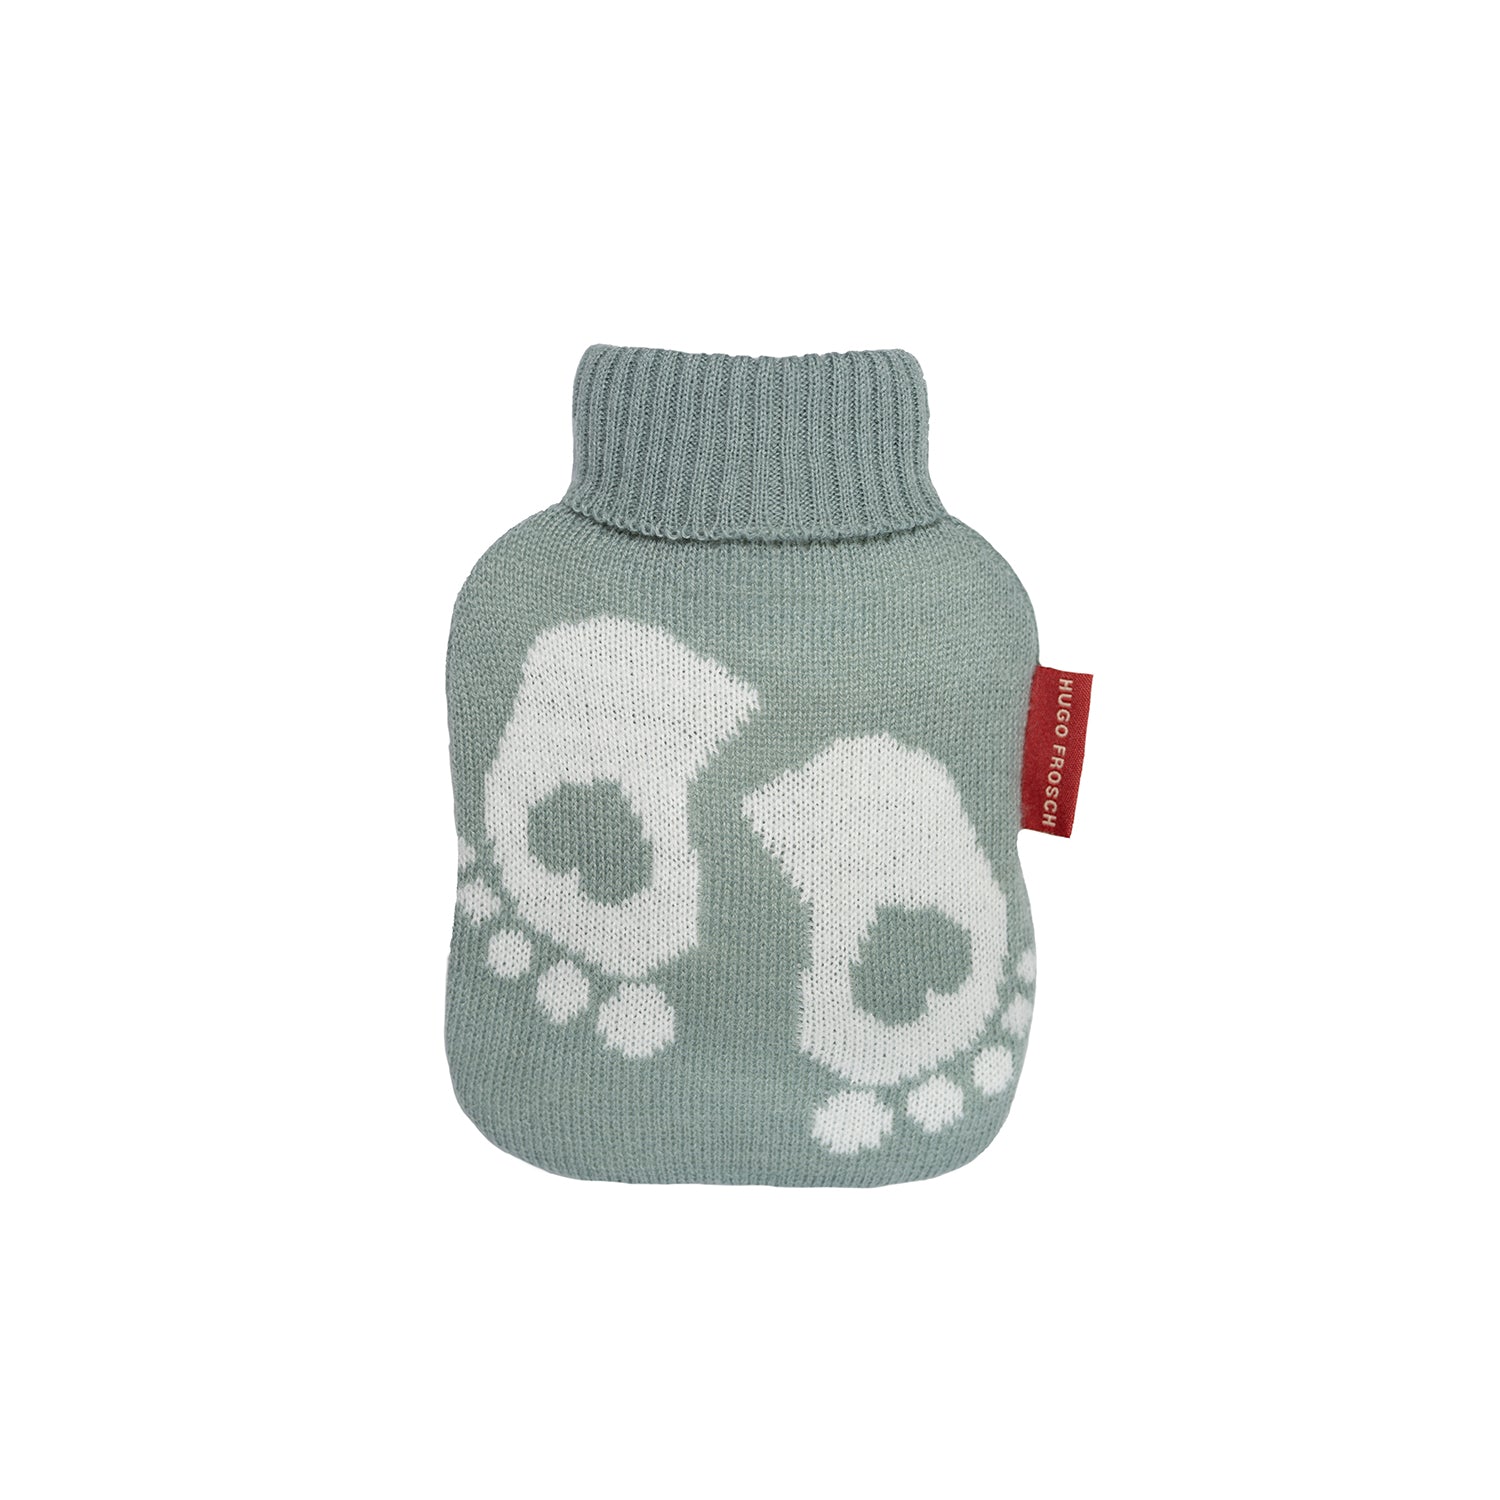 0.2 Litre Luxury Mini Hot Water Bottle with Baby Feet Pastel Green Fine Knitted Cover (rubberless)